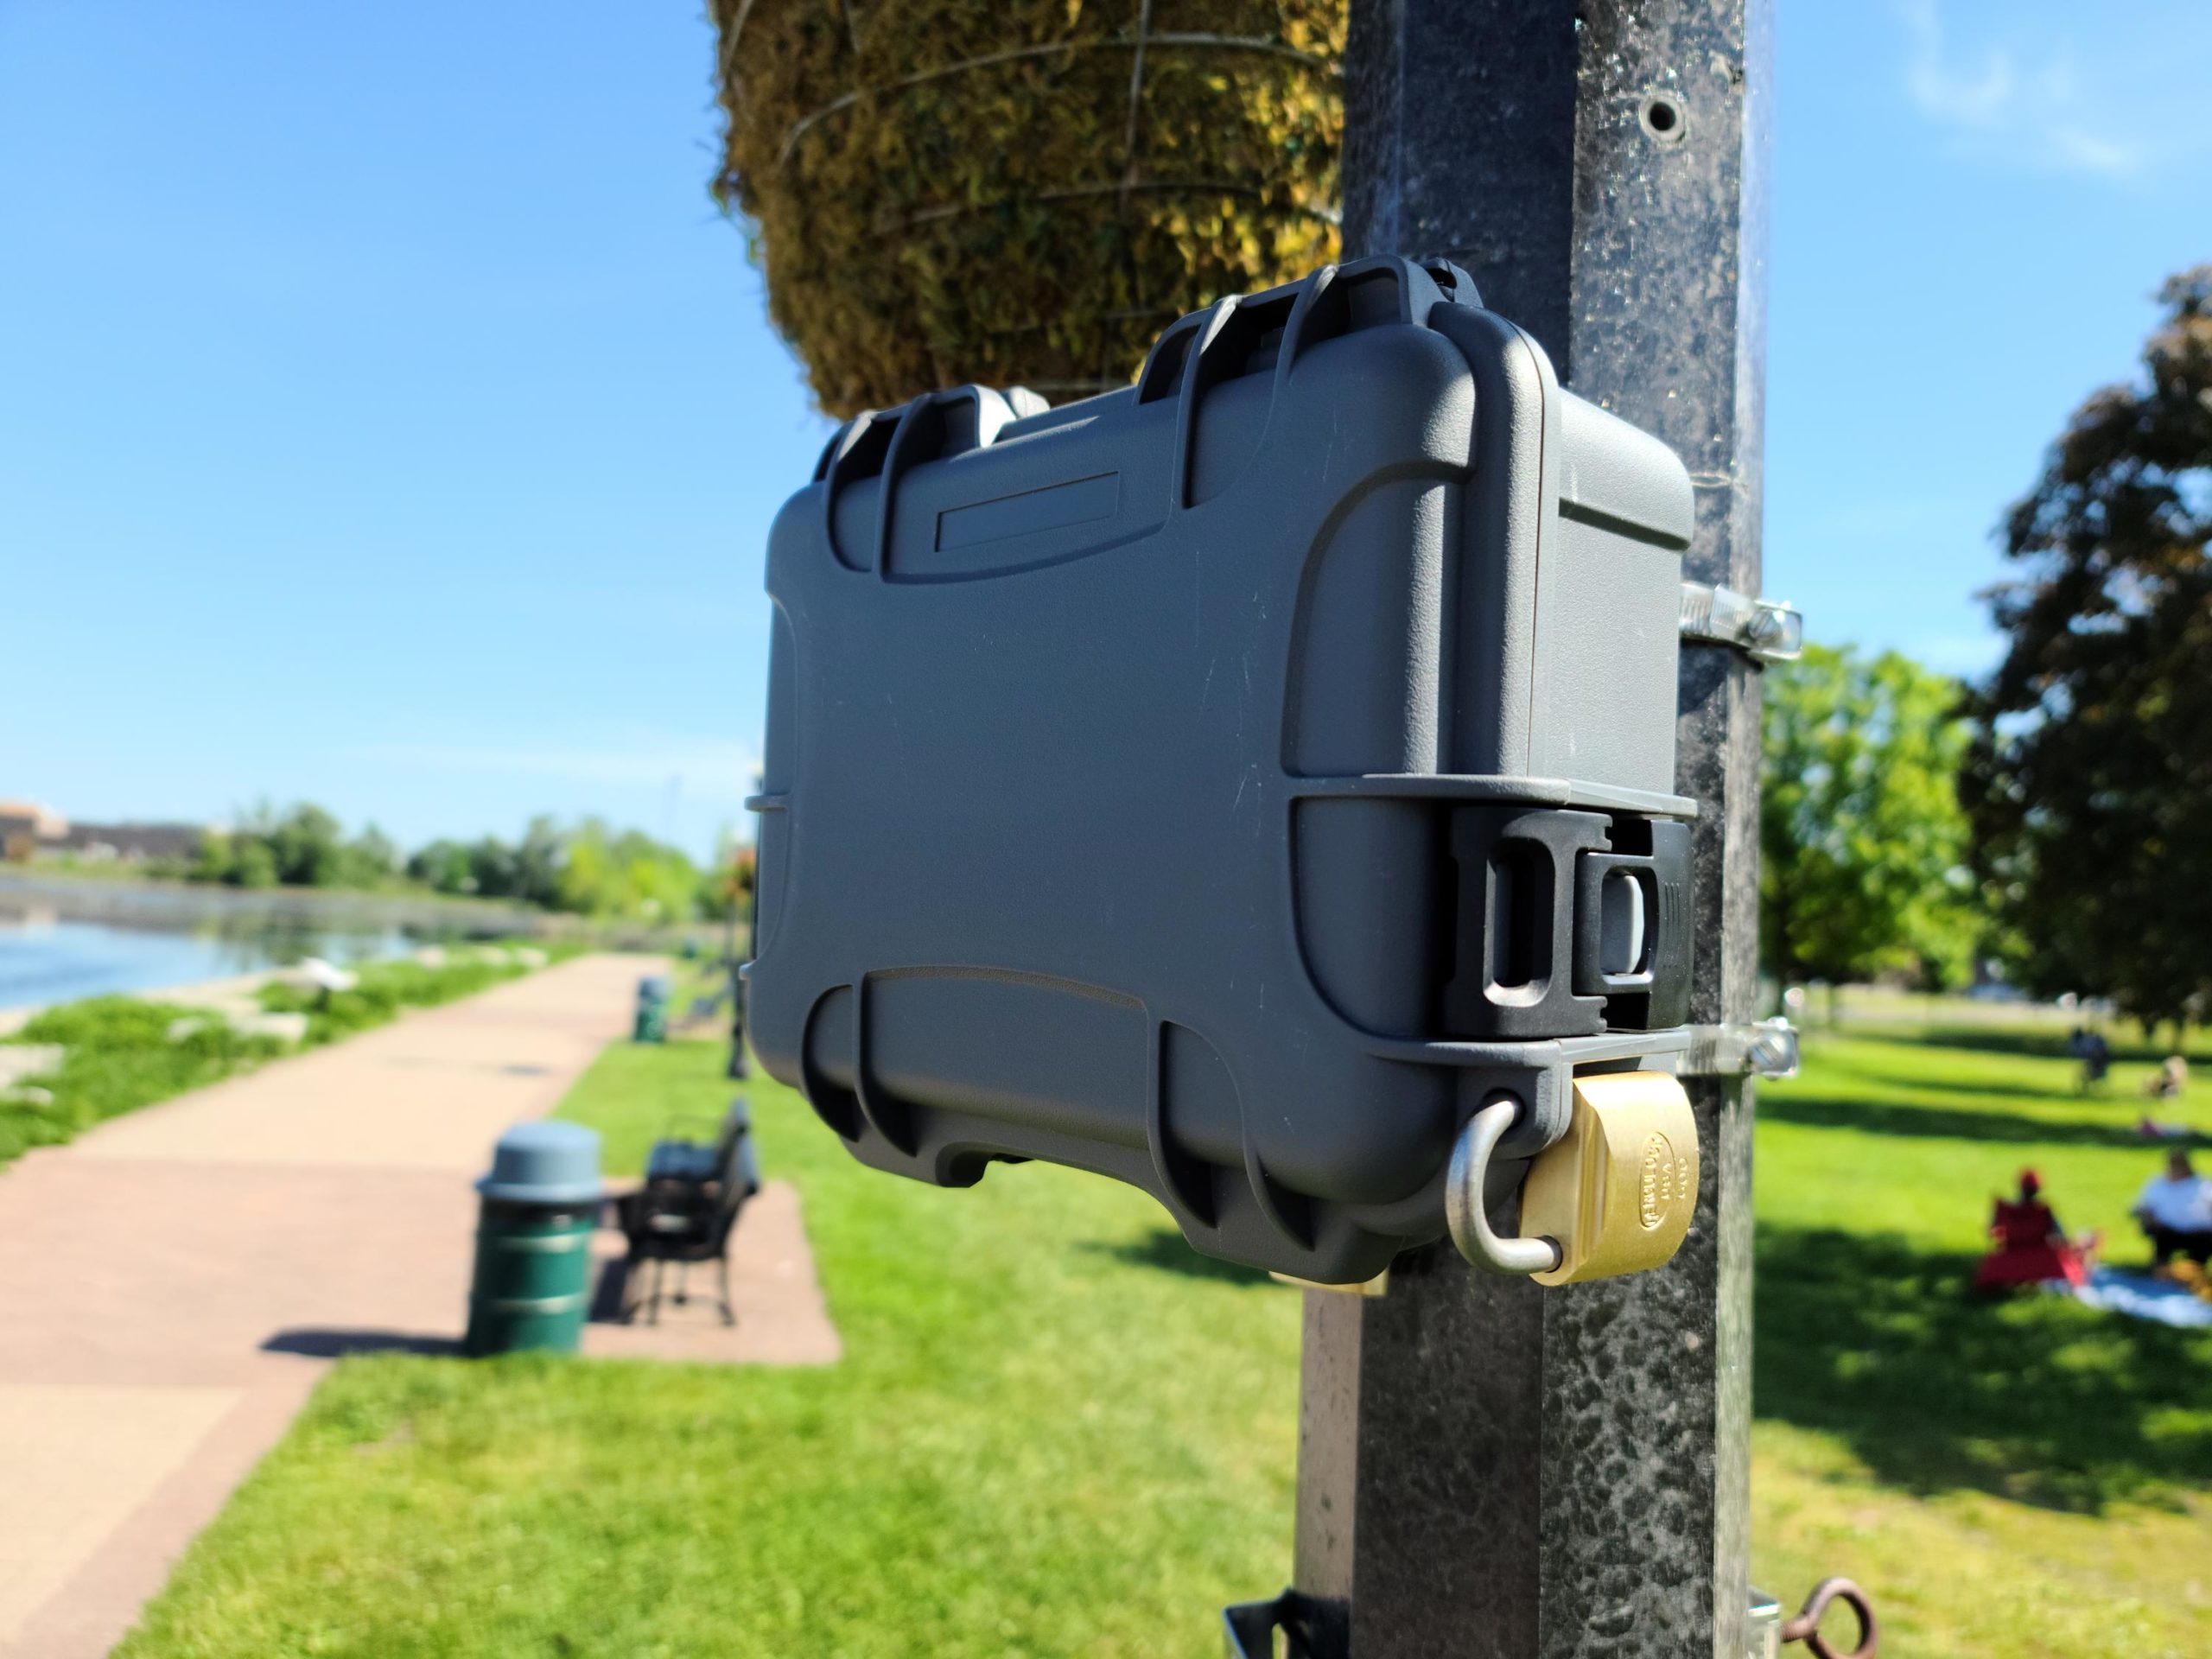 Otter radar secured and locked to utility pole on Old Simcoe Rd., Port Perry, Ontario